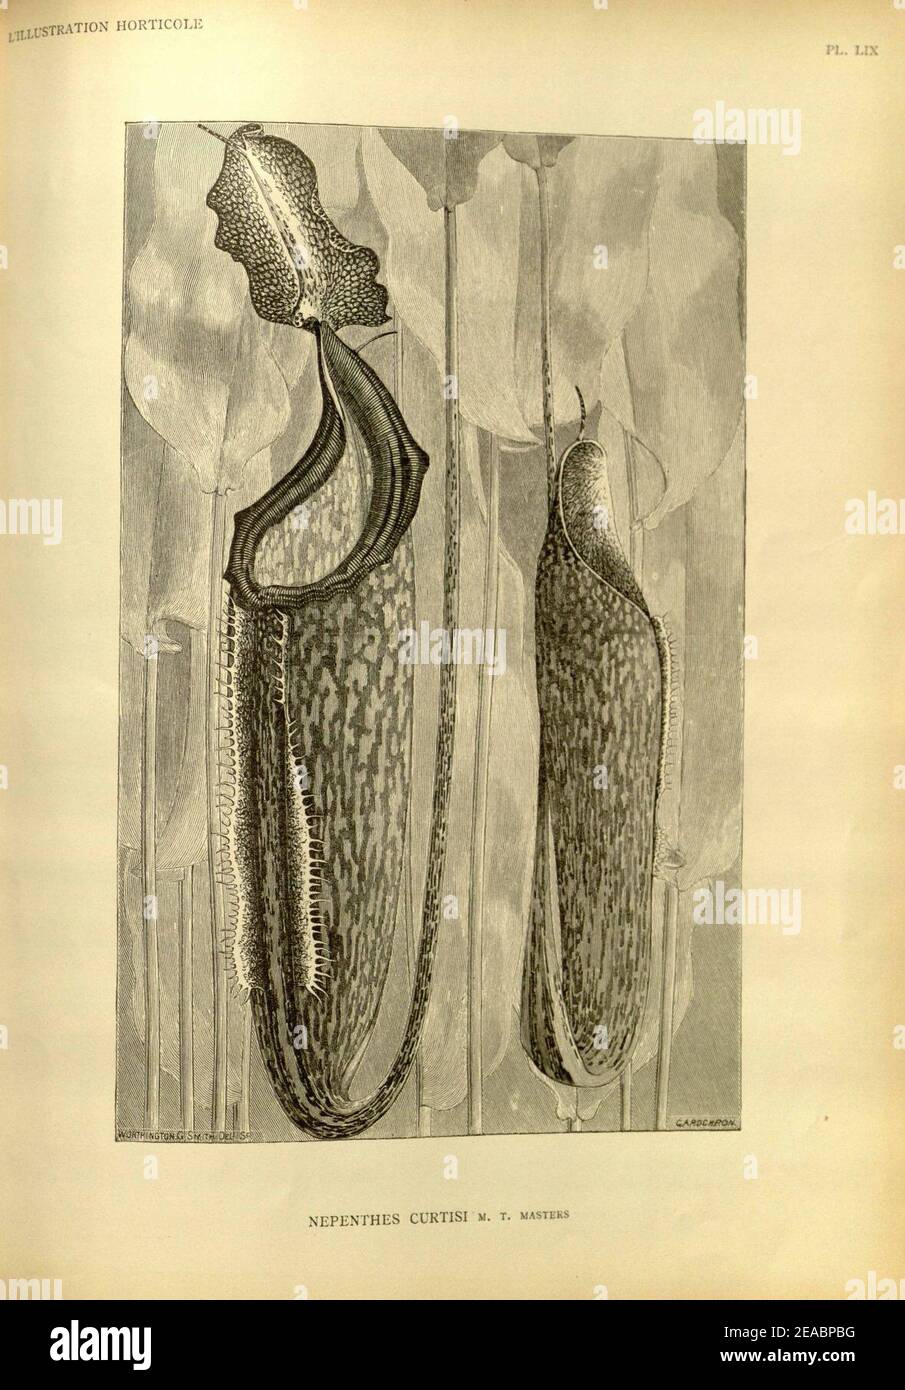 Nepenthes curtisii - L’Illustration horticole (1888). Stock Photo